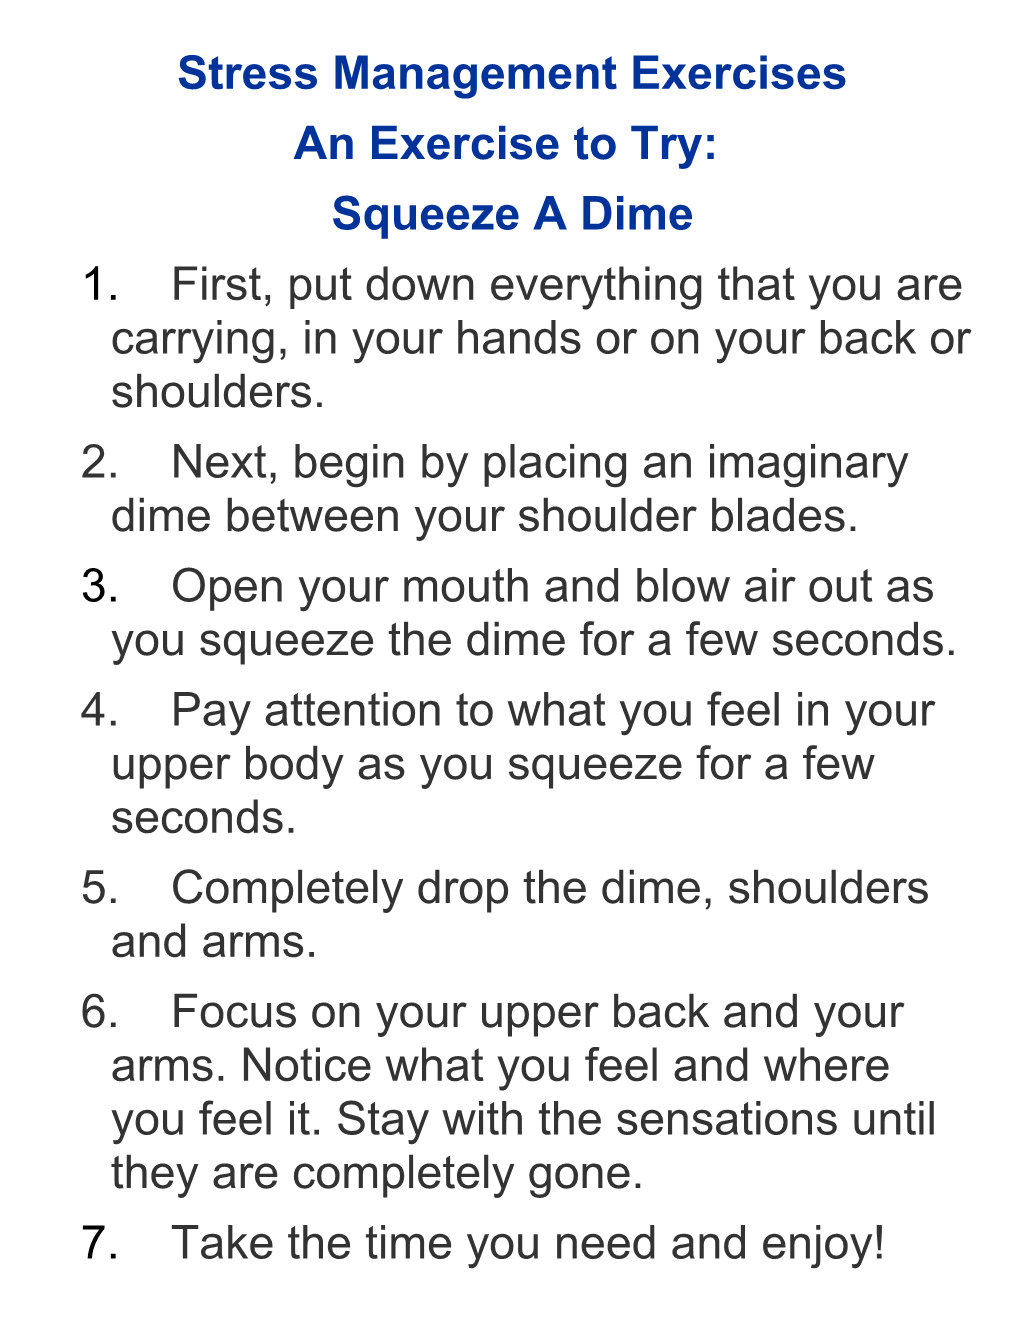 An Exercise to Try: Squeeze a Dime